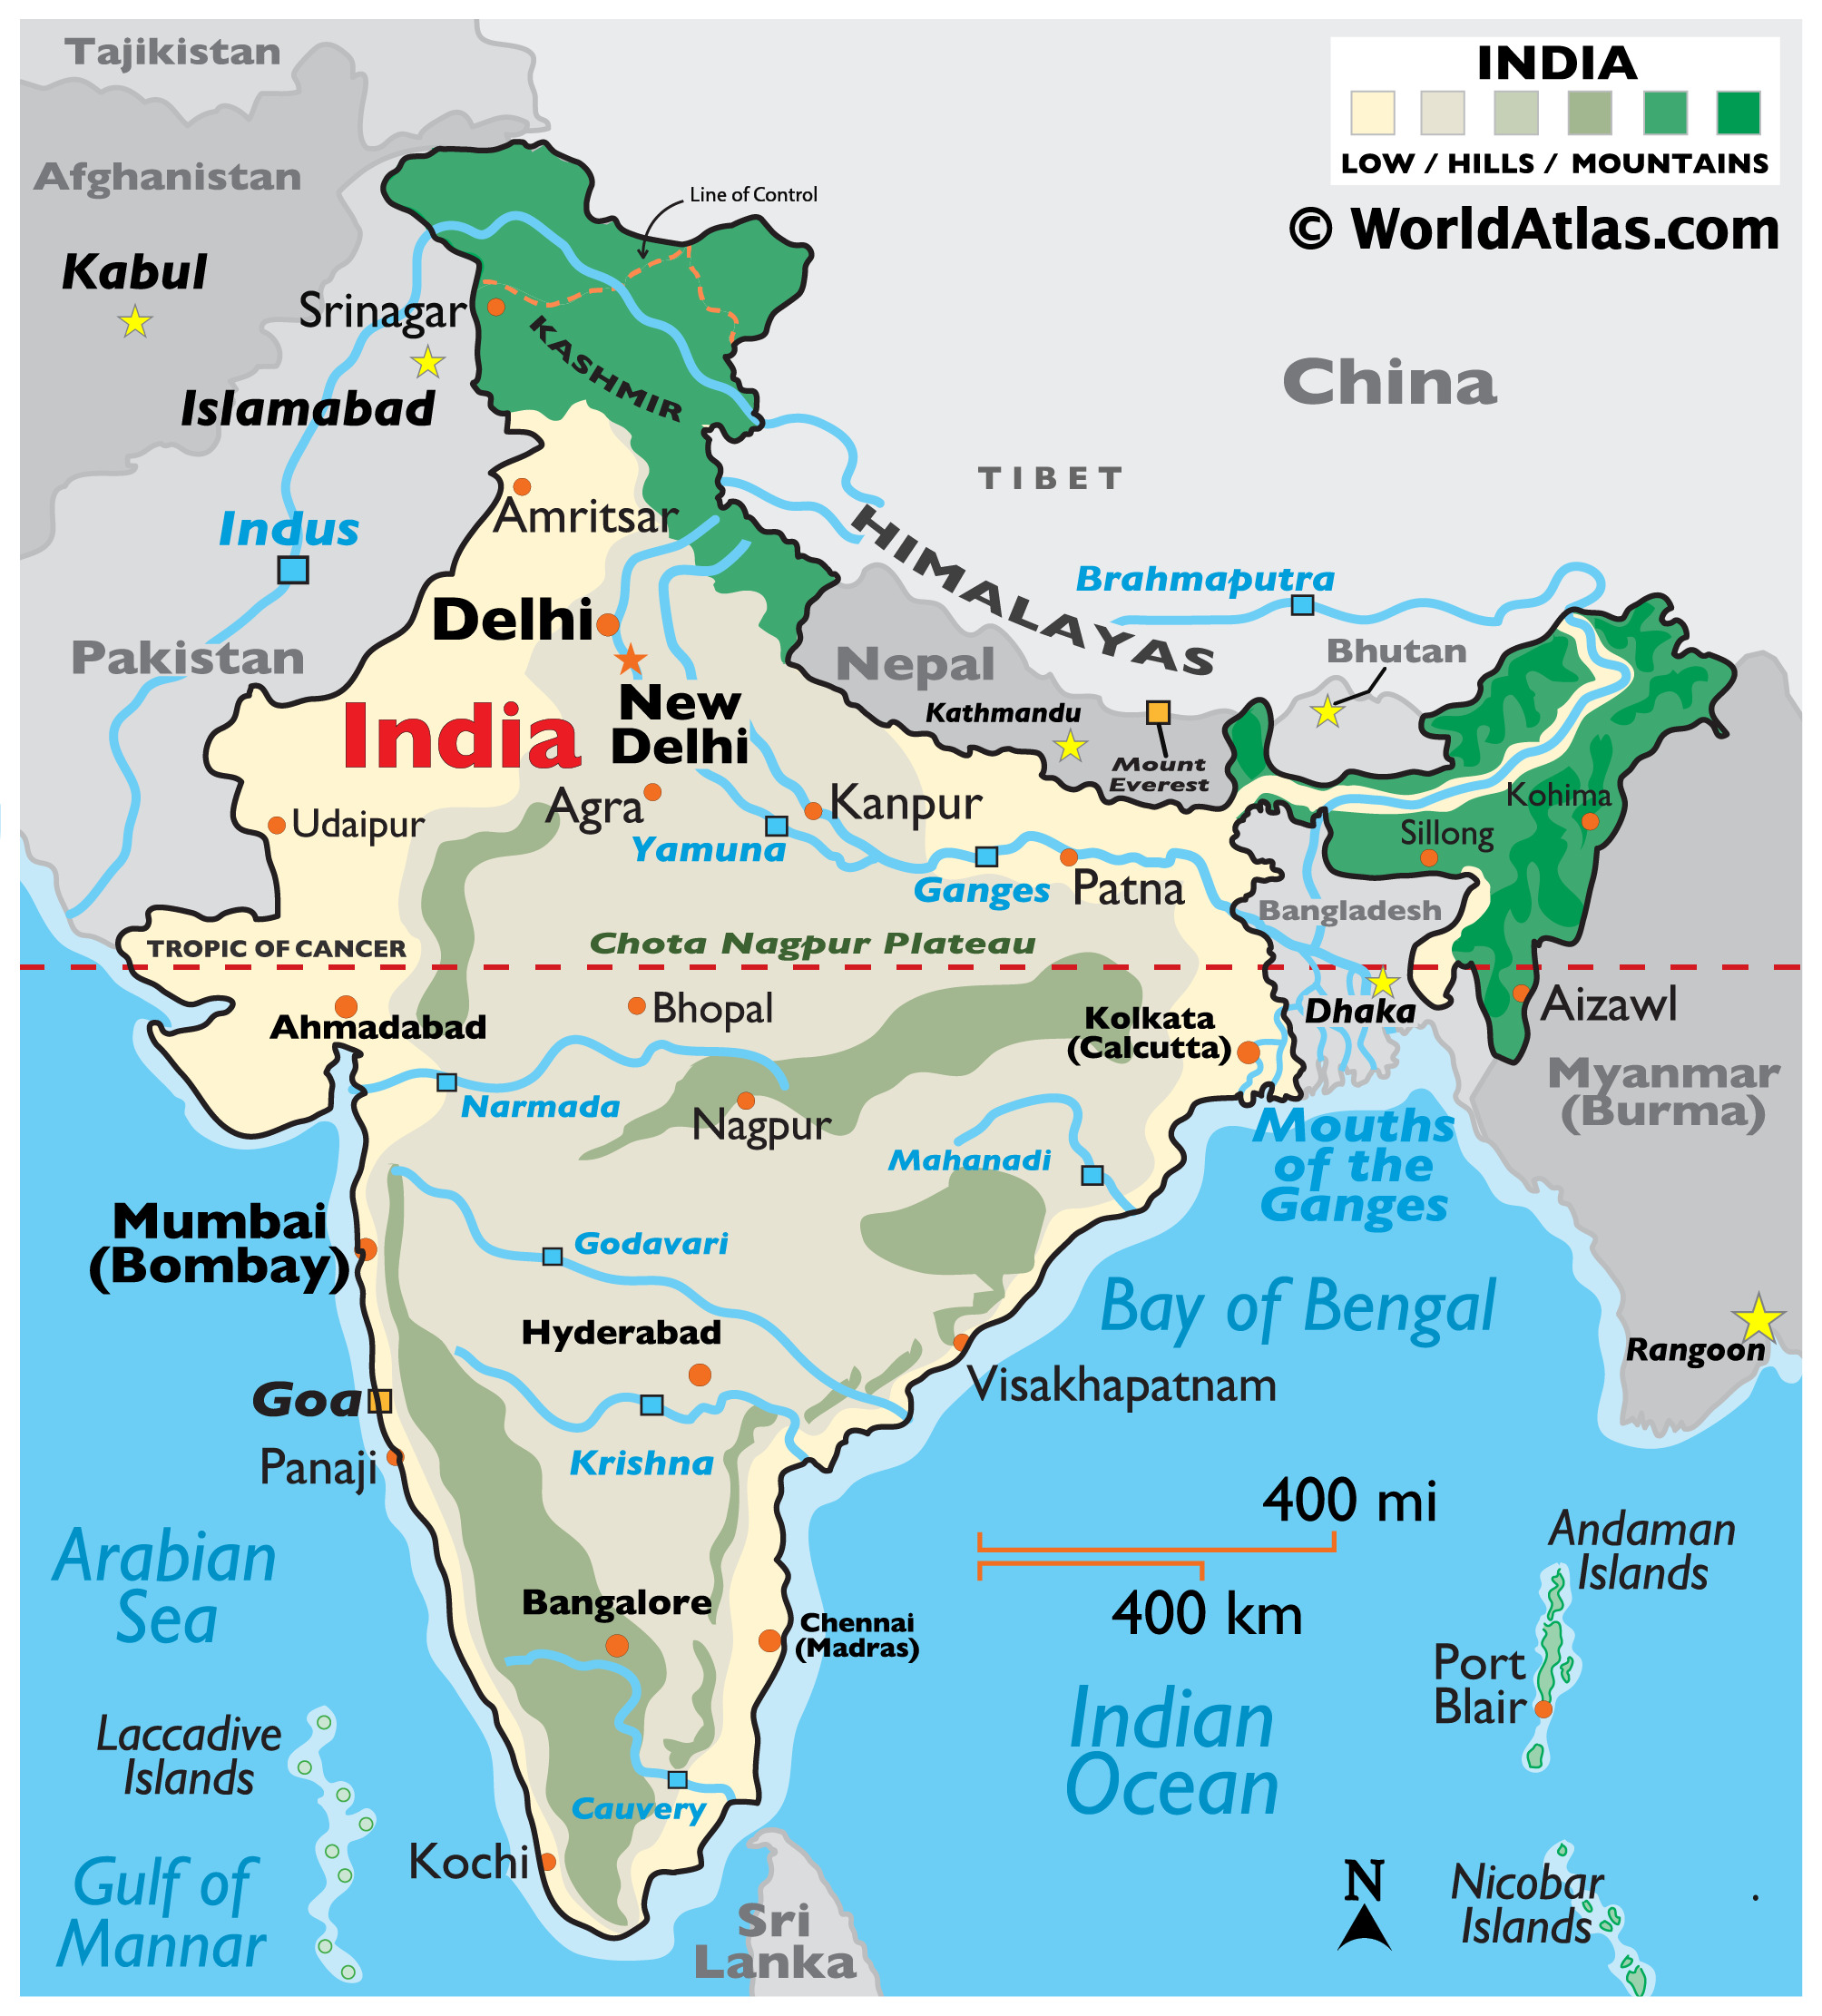 Geographic Map Of India India Map / Map of India   Worldatlas.com